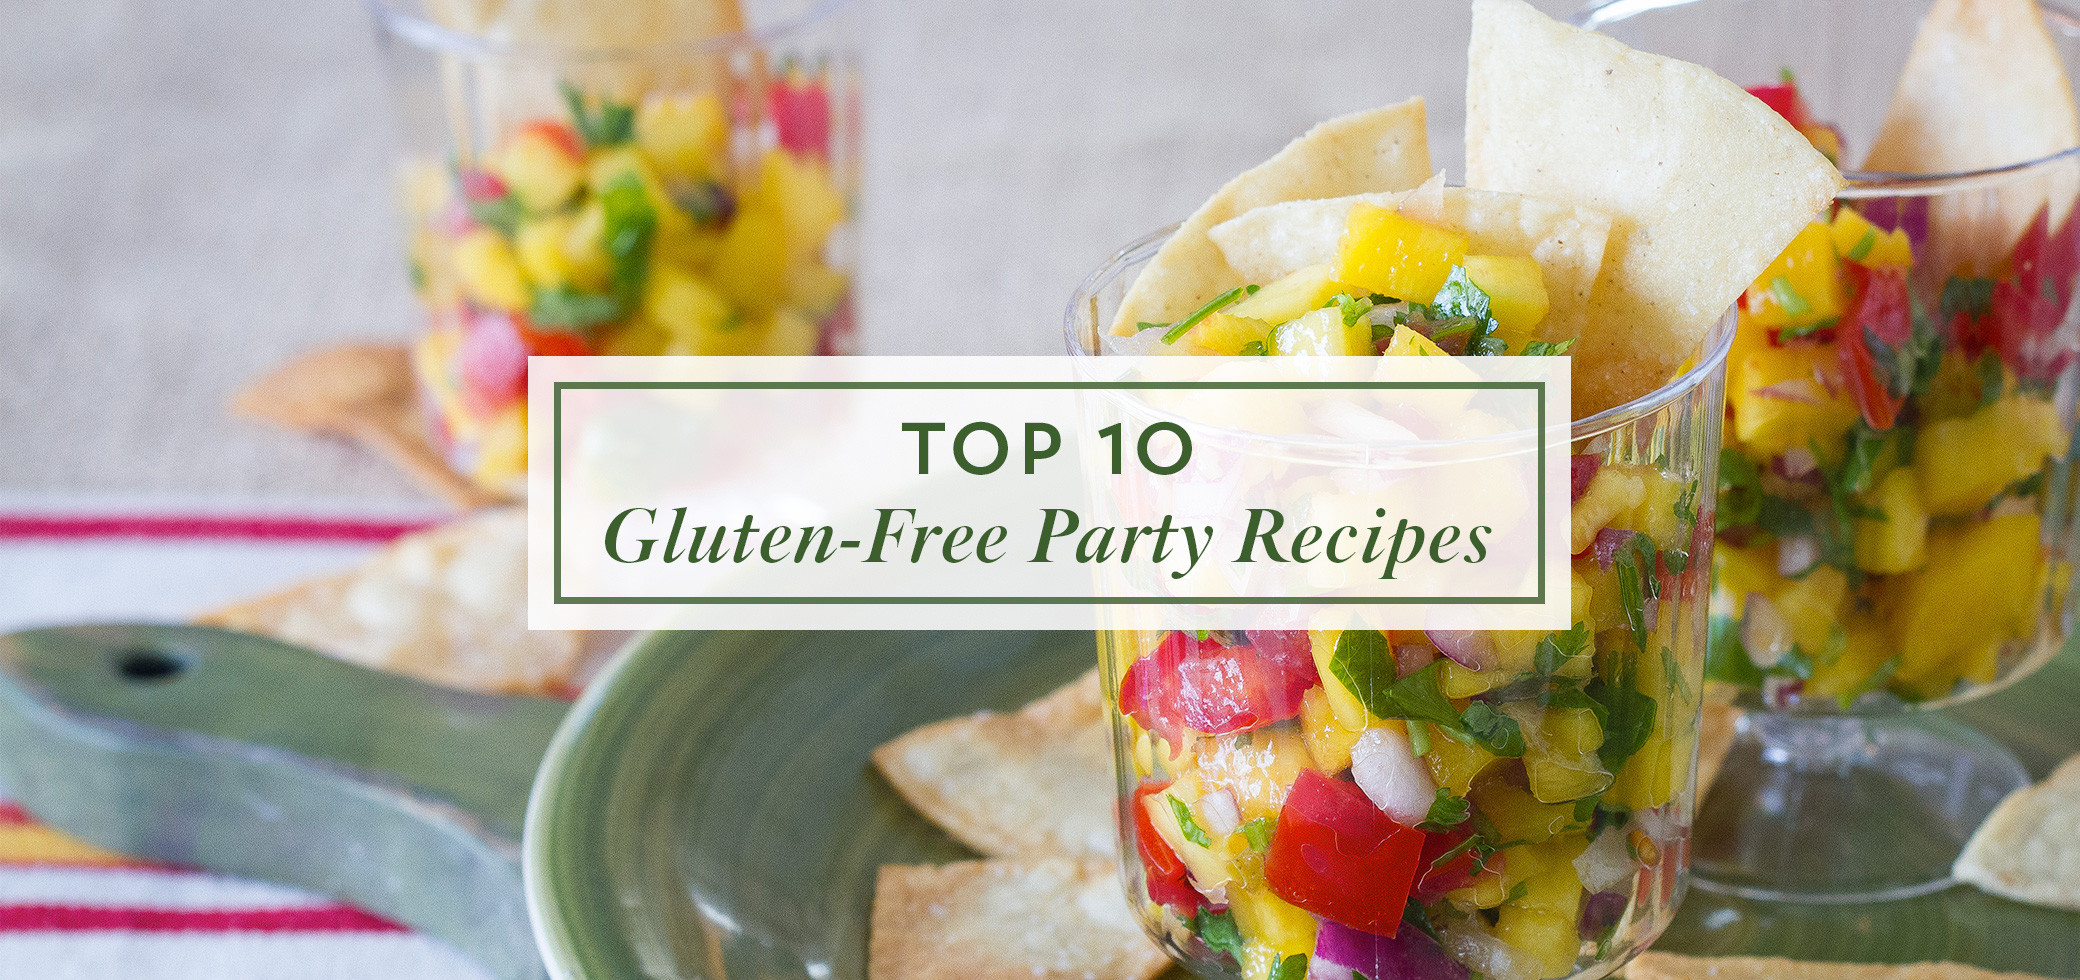 Gluten Free Party Food Ideas
 10 Gluten Free Party Recipes that Won t Fall Flat on Flavor